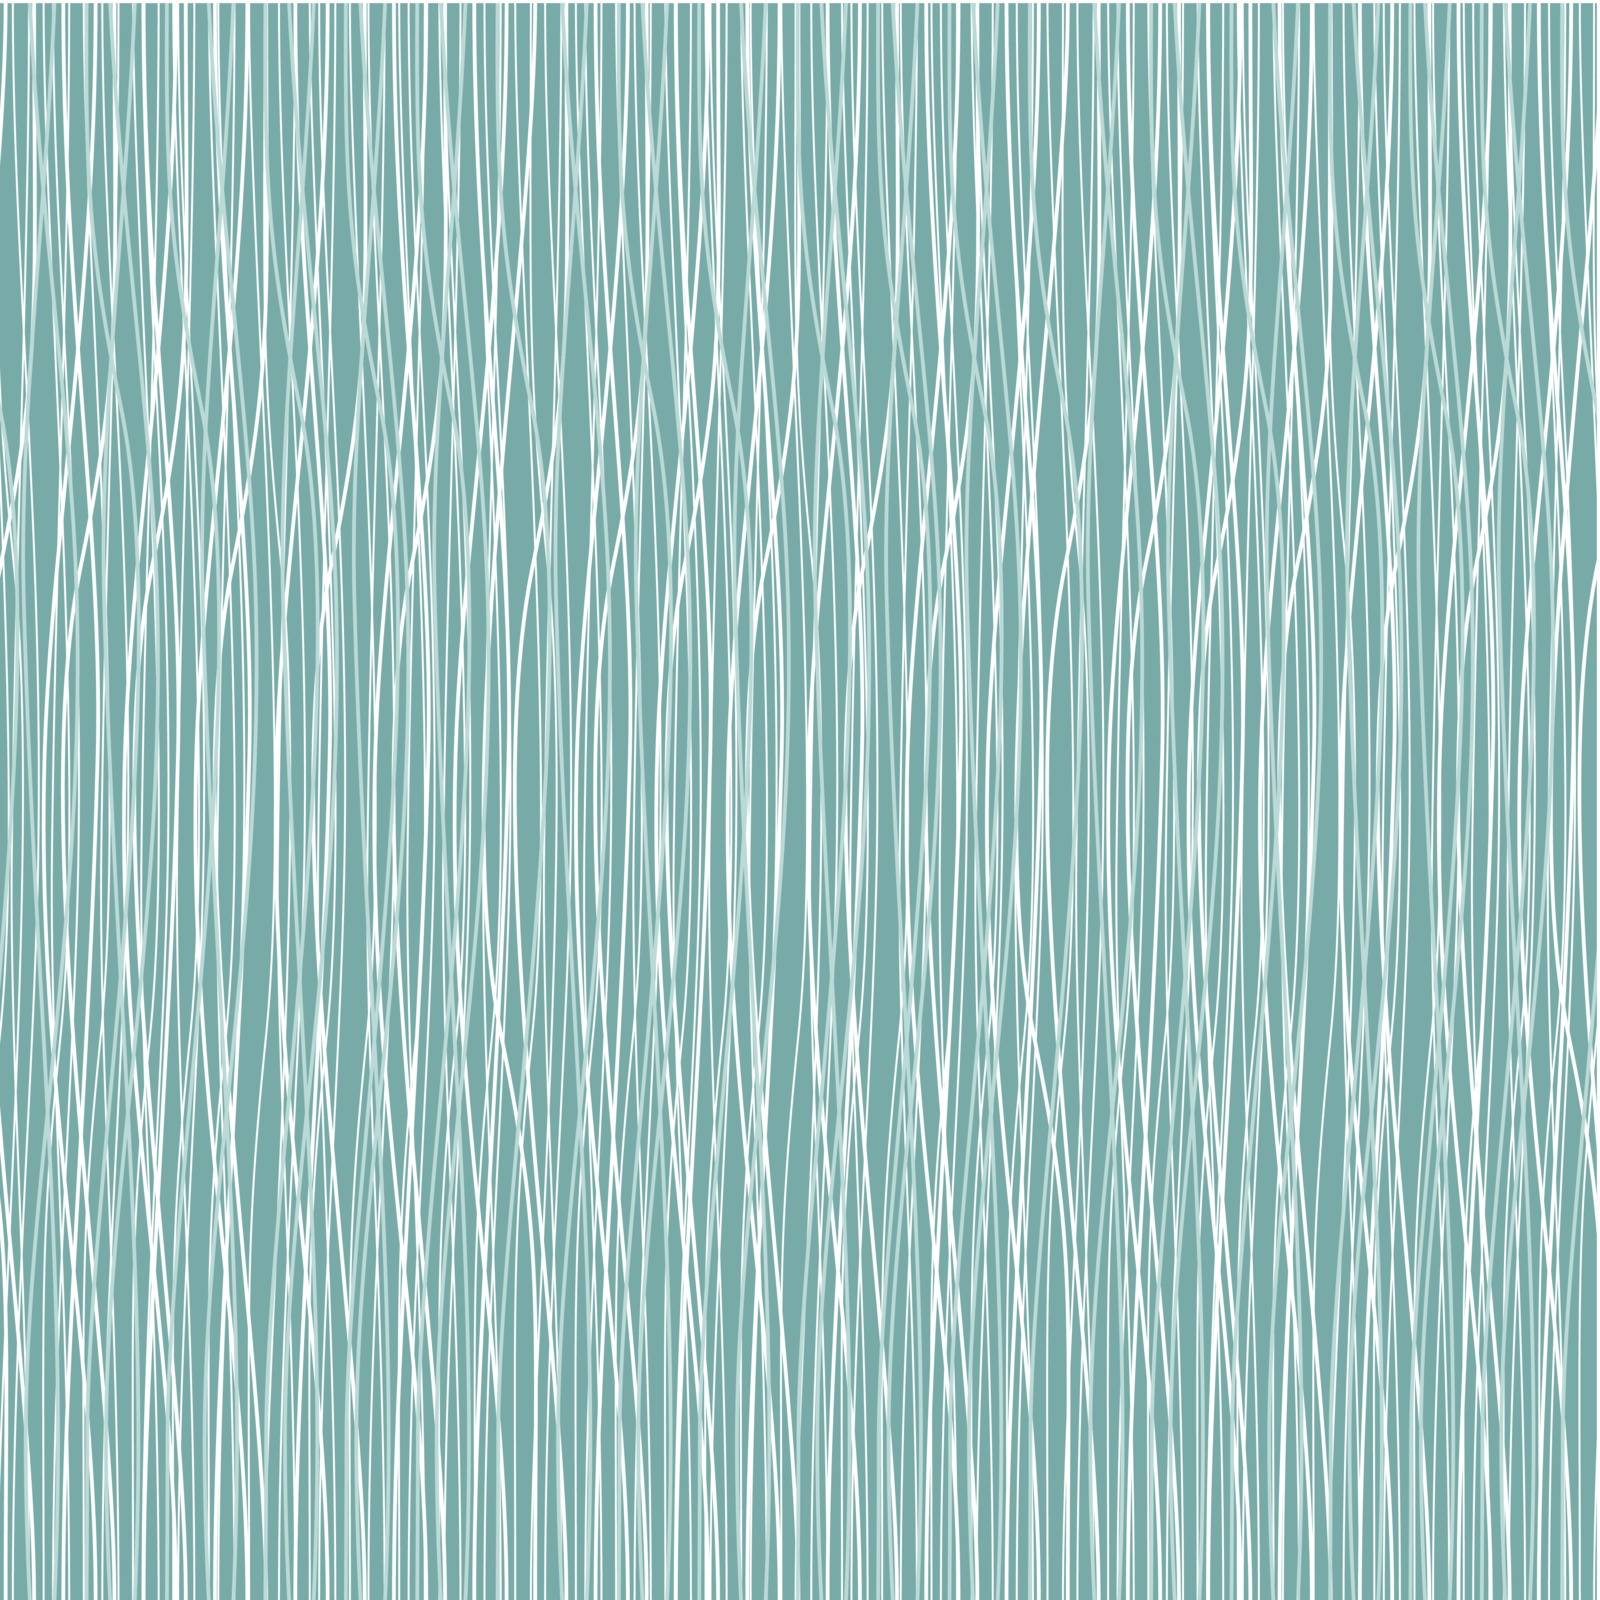 Seamless textile pattern background by SelenaMay